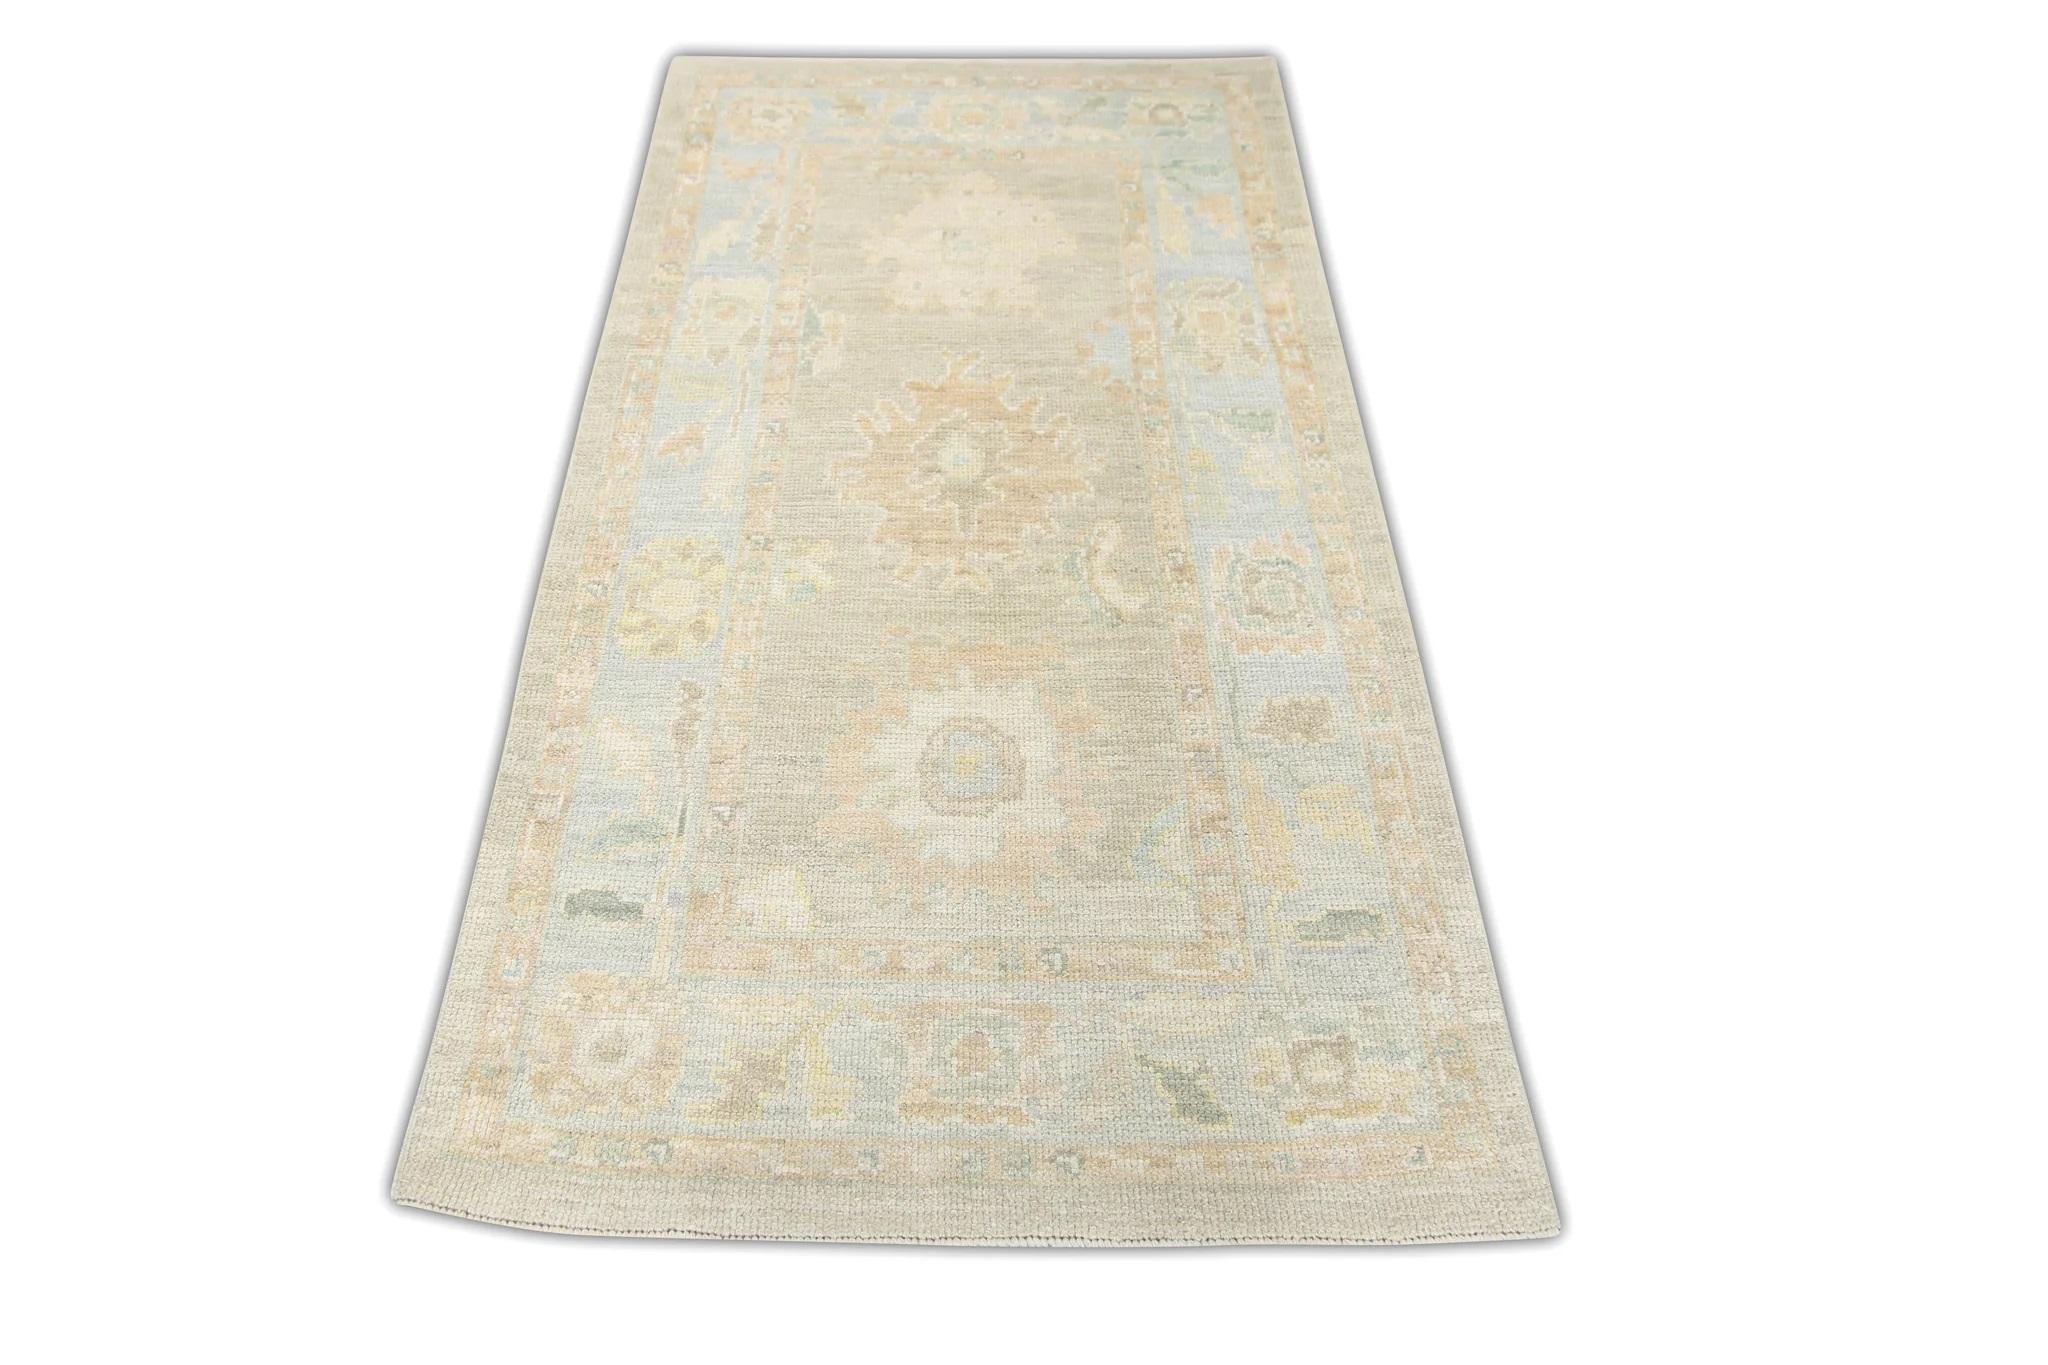 Brown and Blue Floral Design Handwoven Wool Turkish Oushak Rug 3' x 5'5